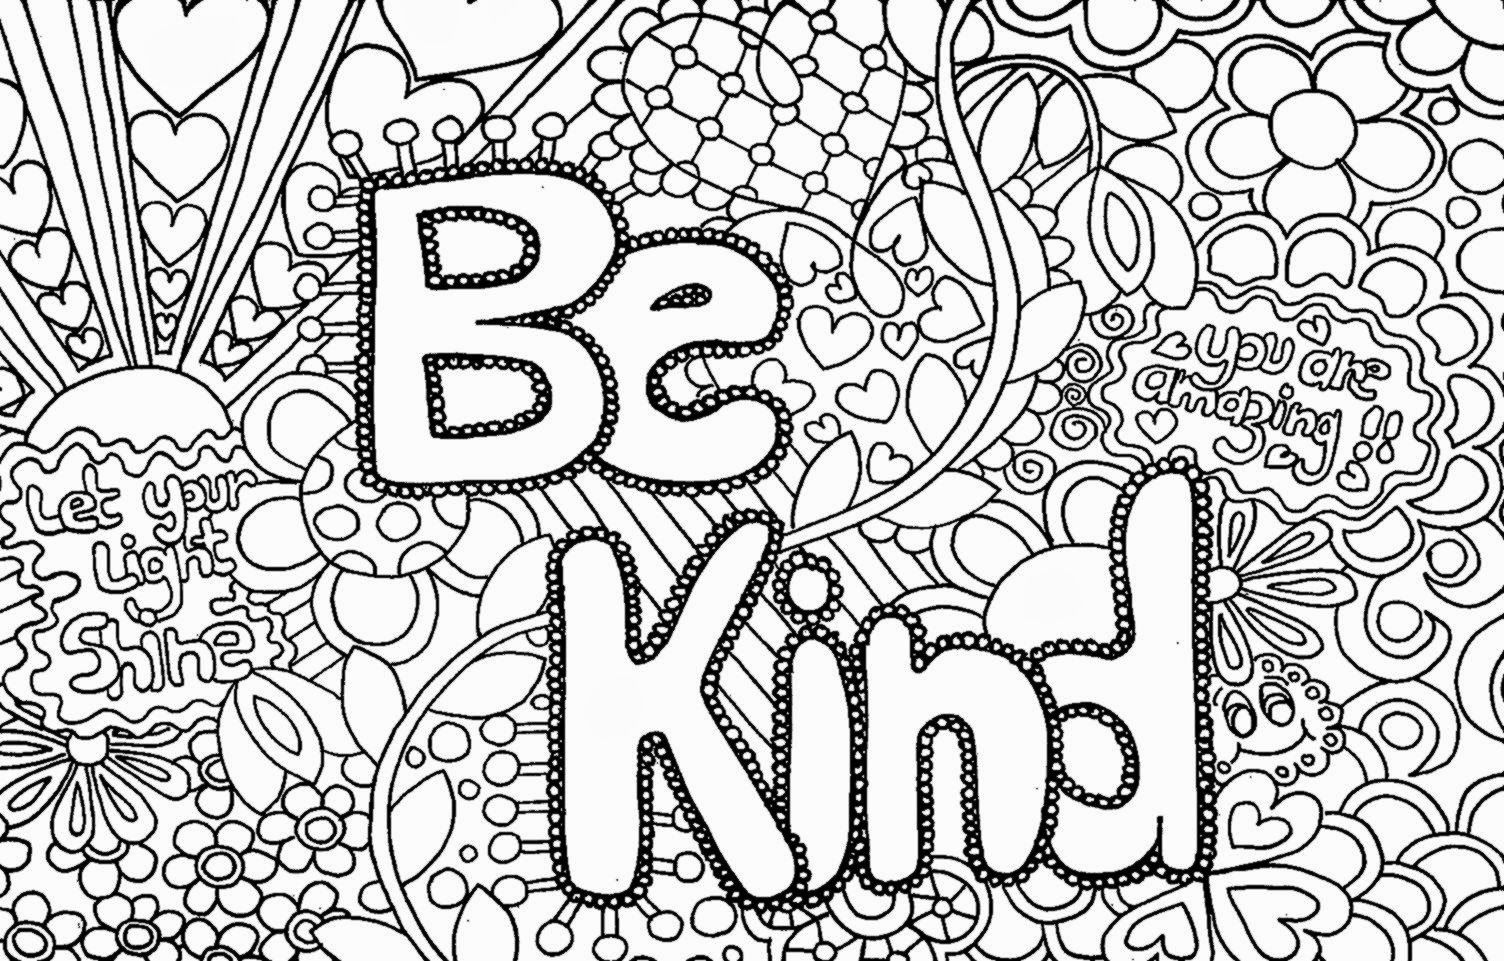 Coloring Sheets For Teenagers | Free Coloring Sheet